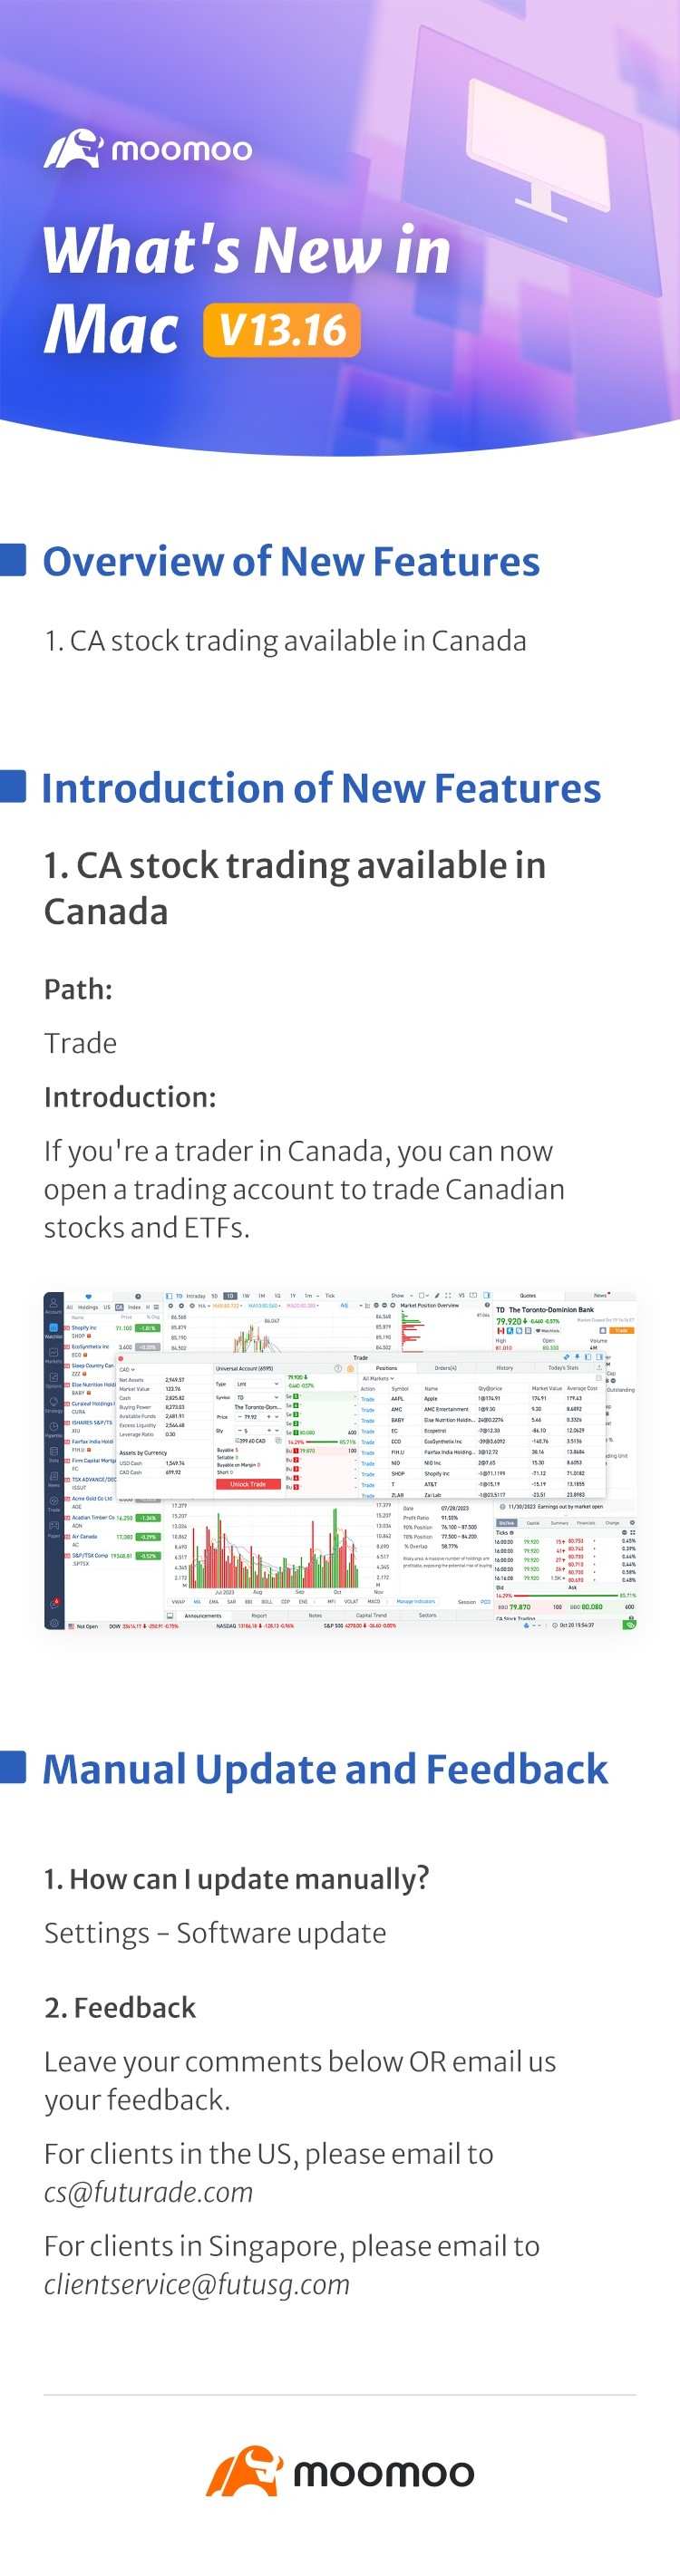 What's New: CA stock trading available in Canada in Mac v13.16